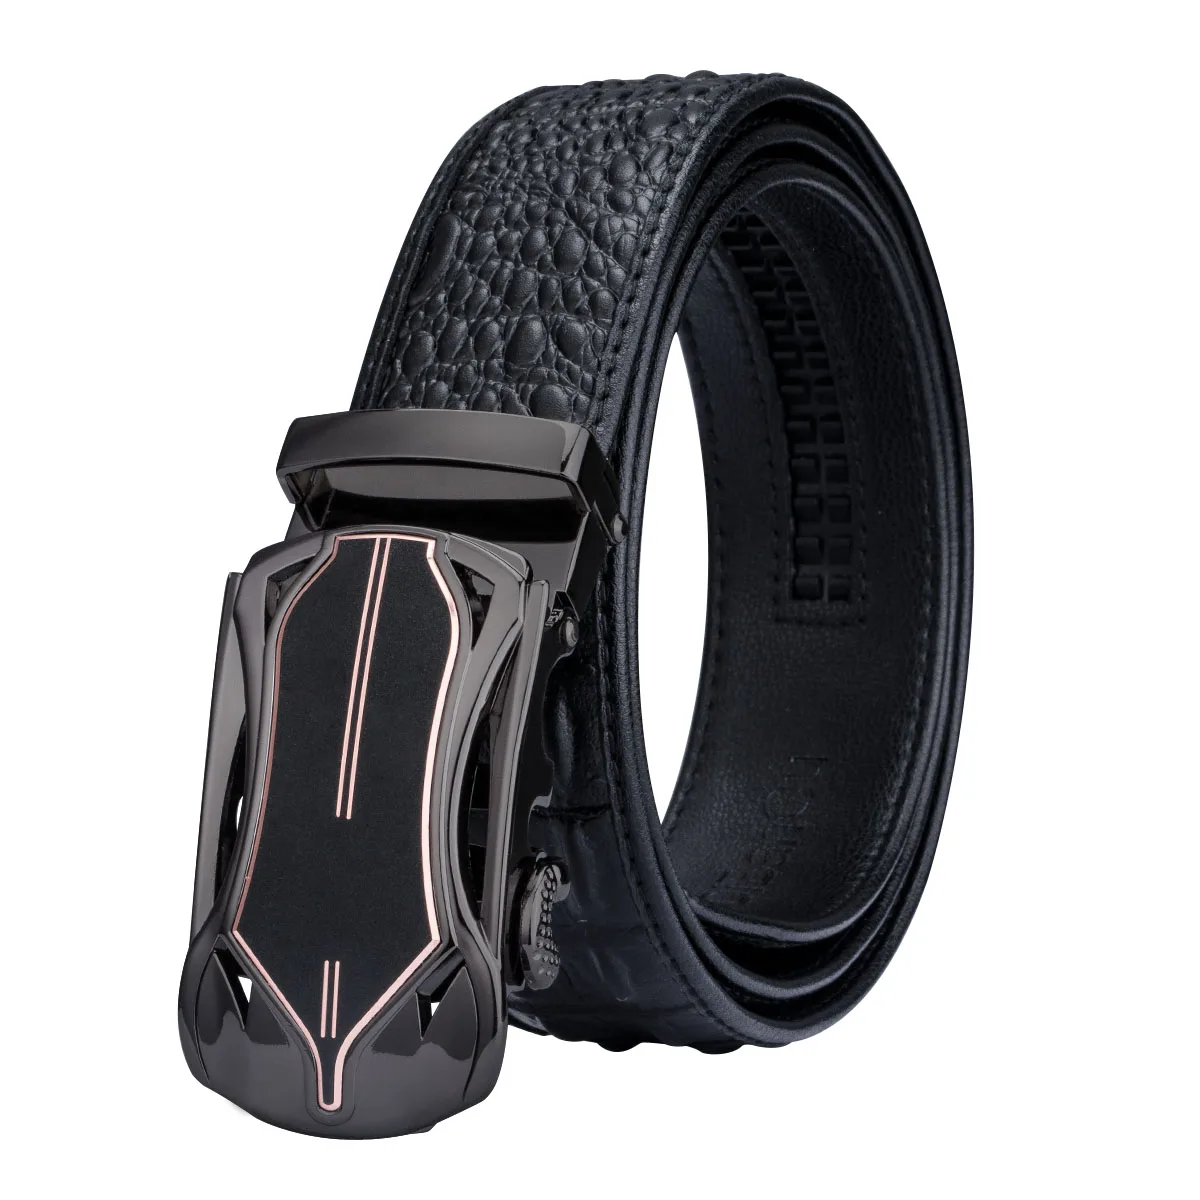 www.neverfullmm.com : Buy Hi Tie Mens Casual Leather Belts for Jeans Crocodile Pattern Automatic ...